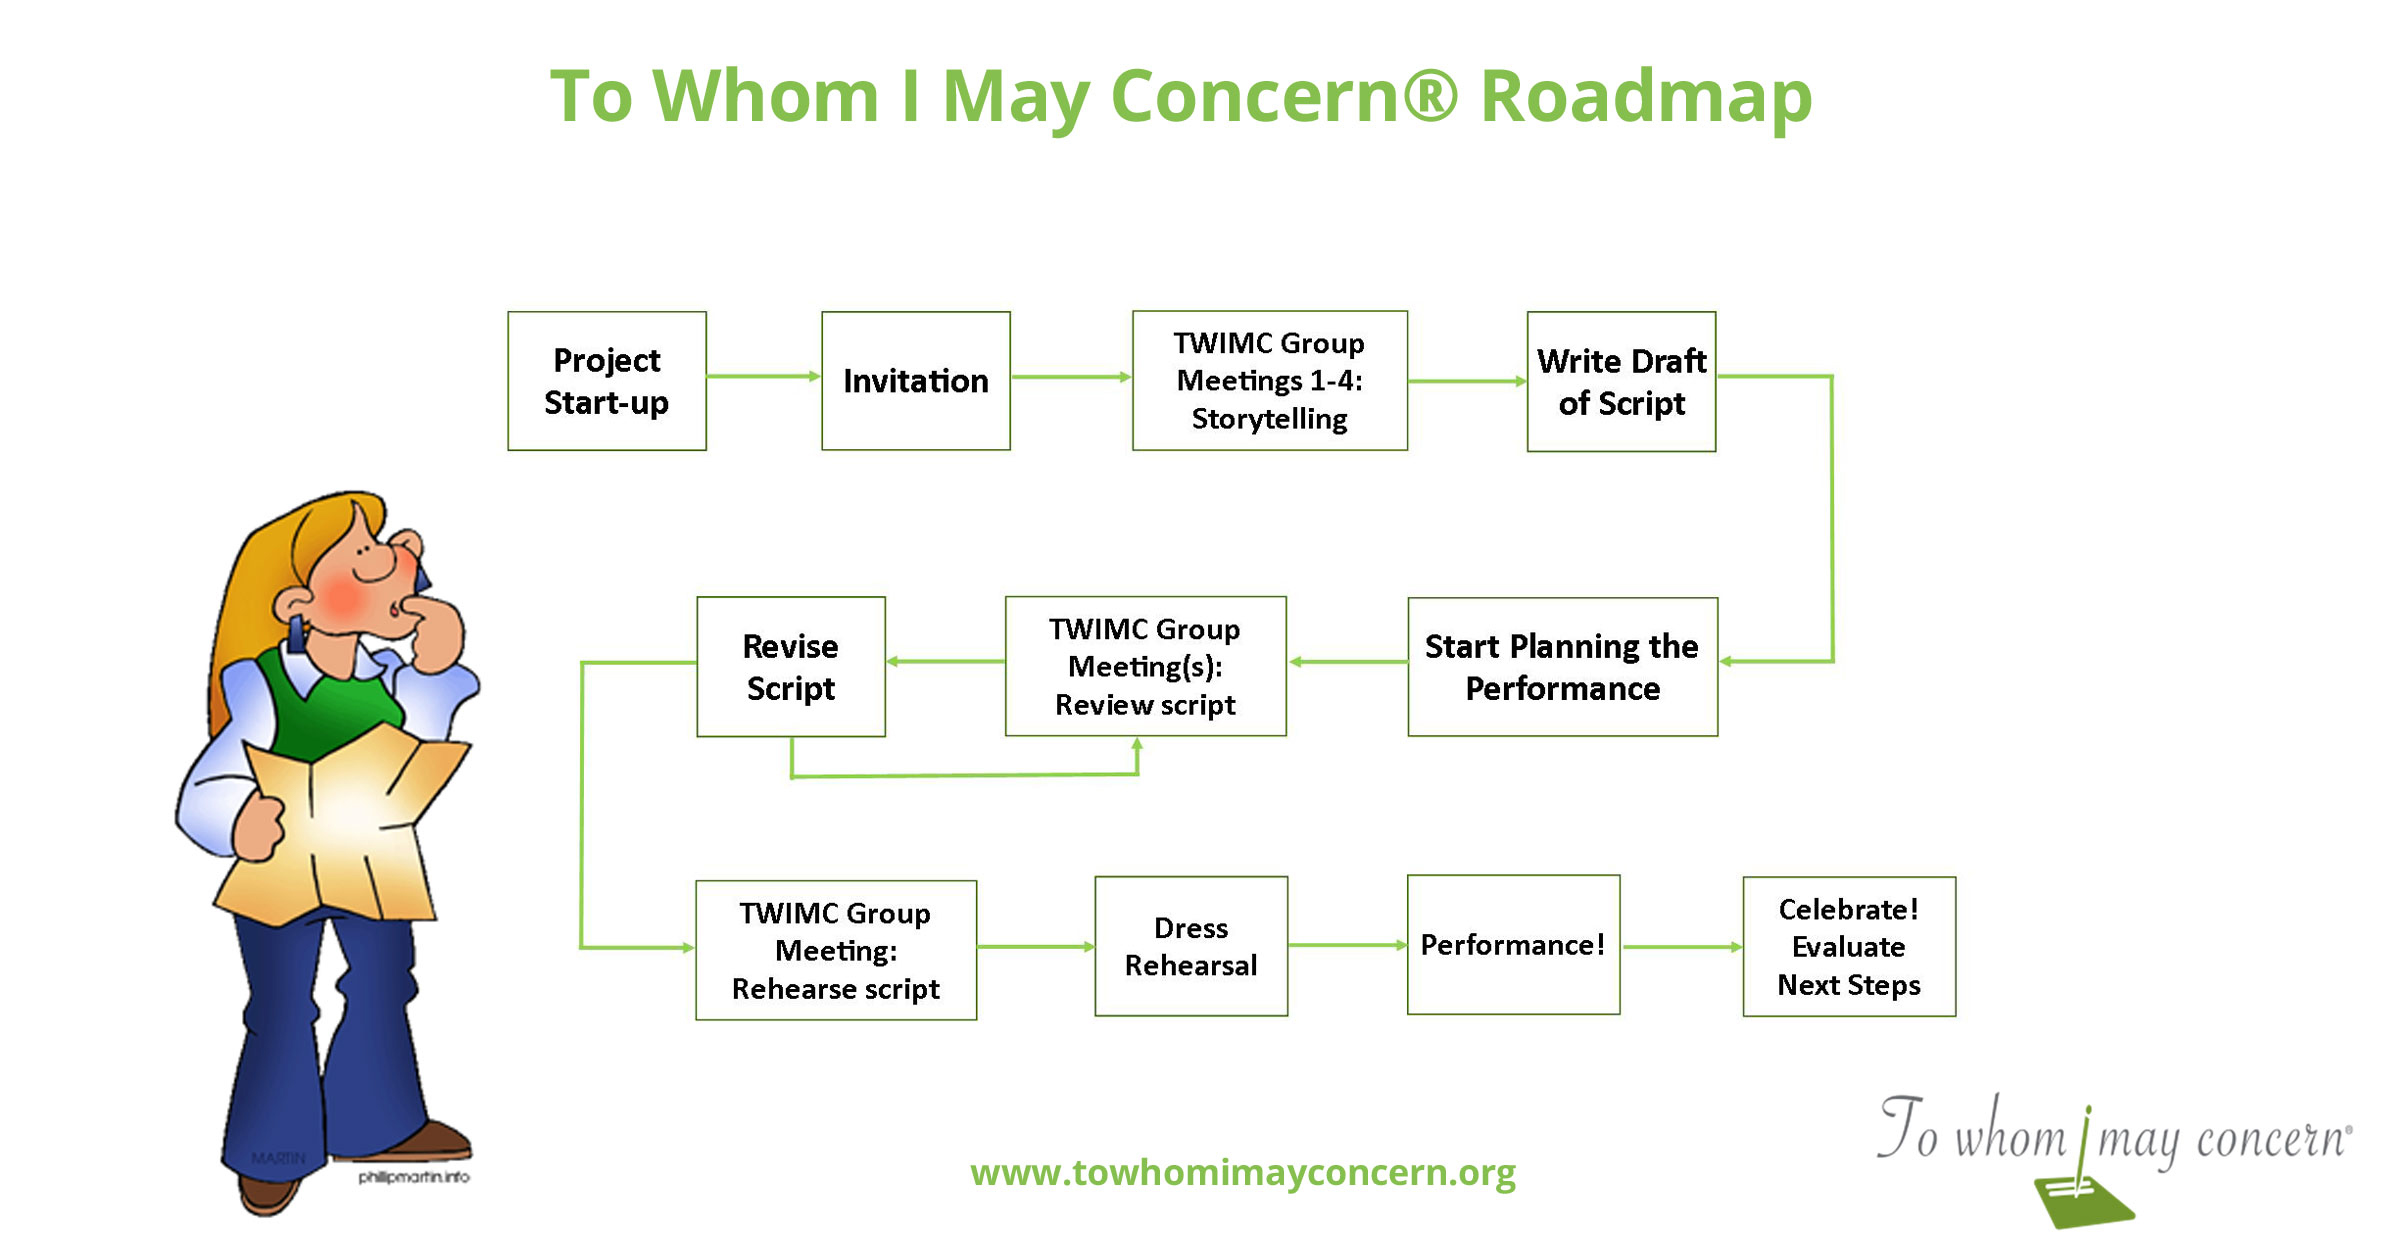 The To Whom I May Concern Roadmap